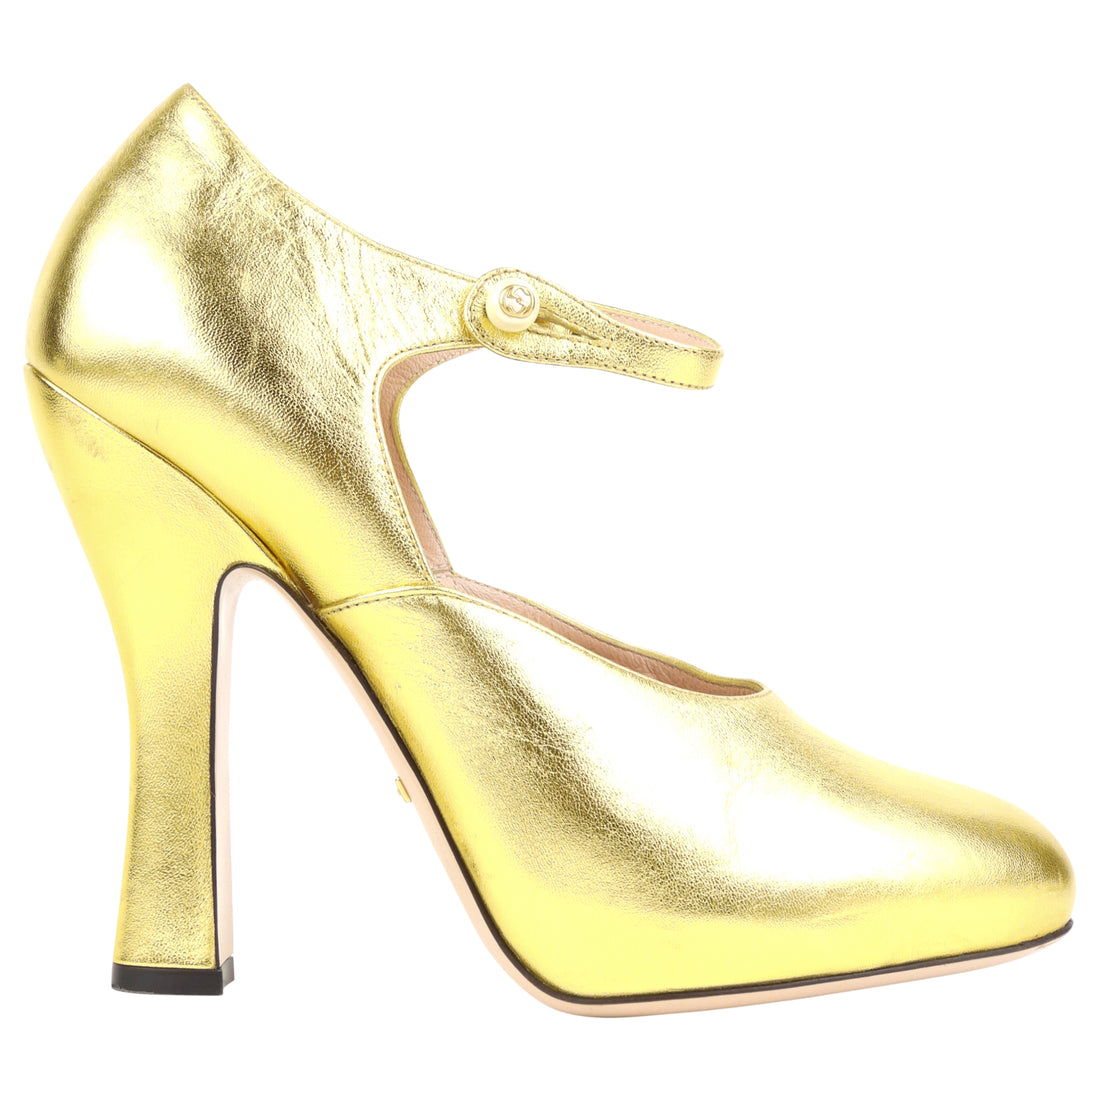 Gucci Gold Metallic Leather Lesley Mary Jane Pumps - 39 IT